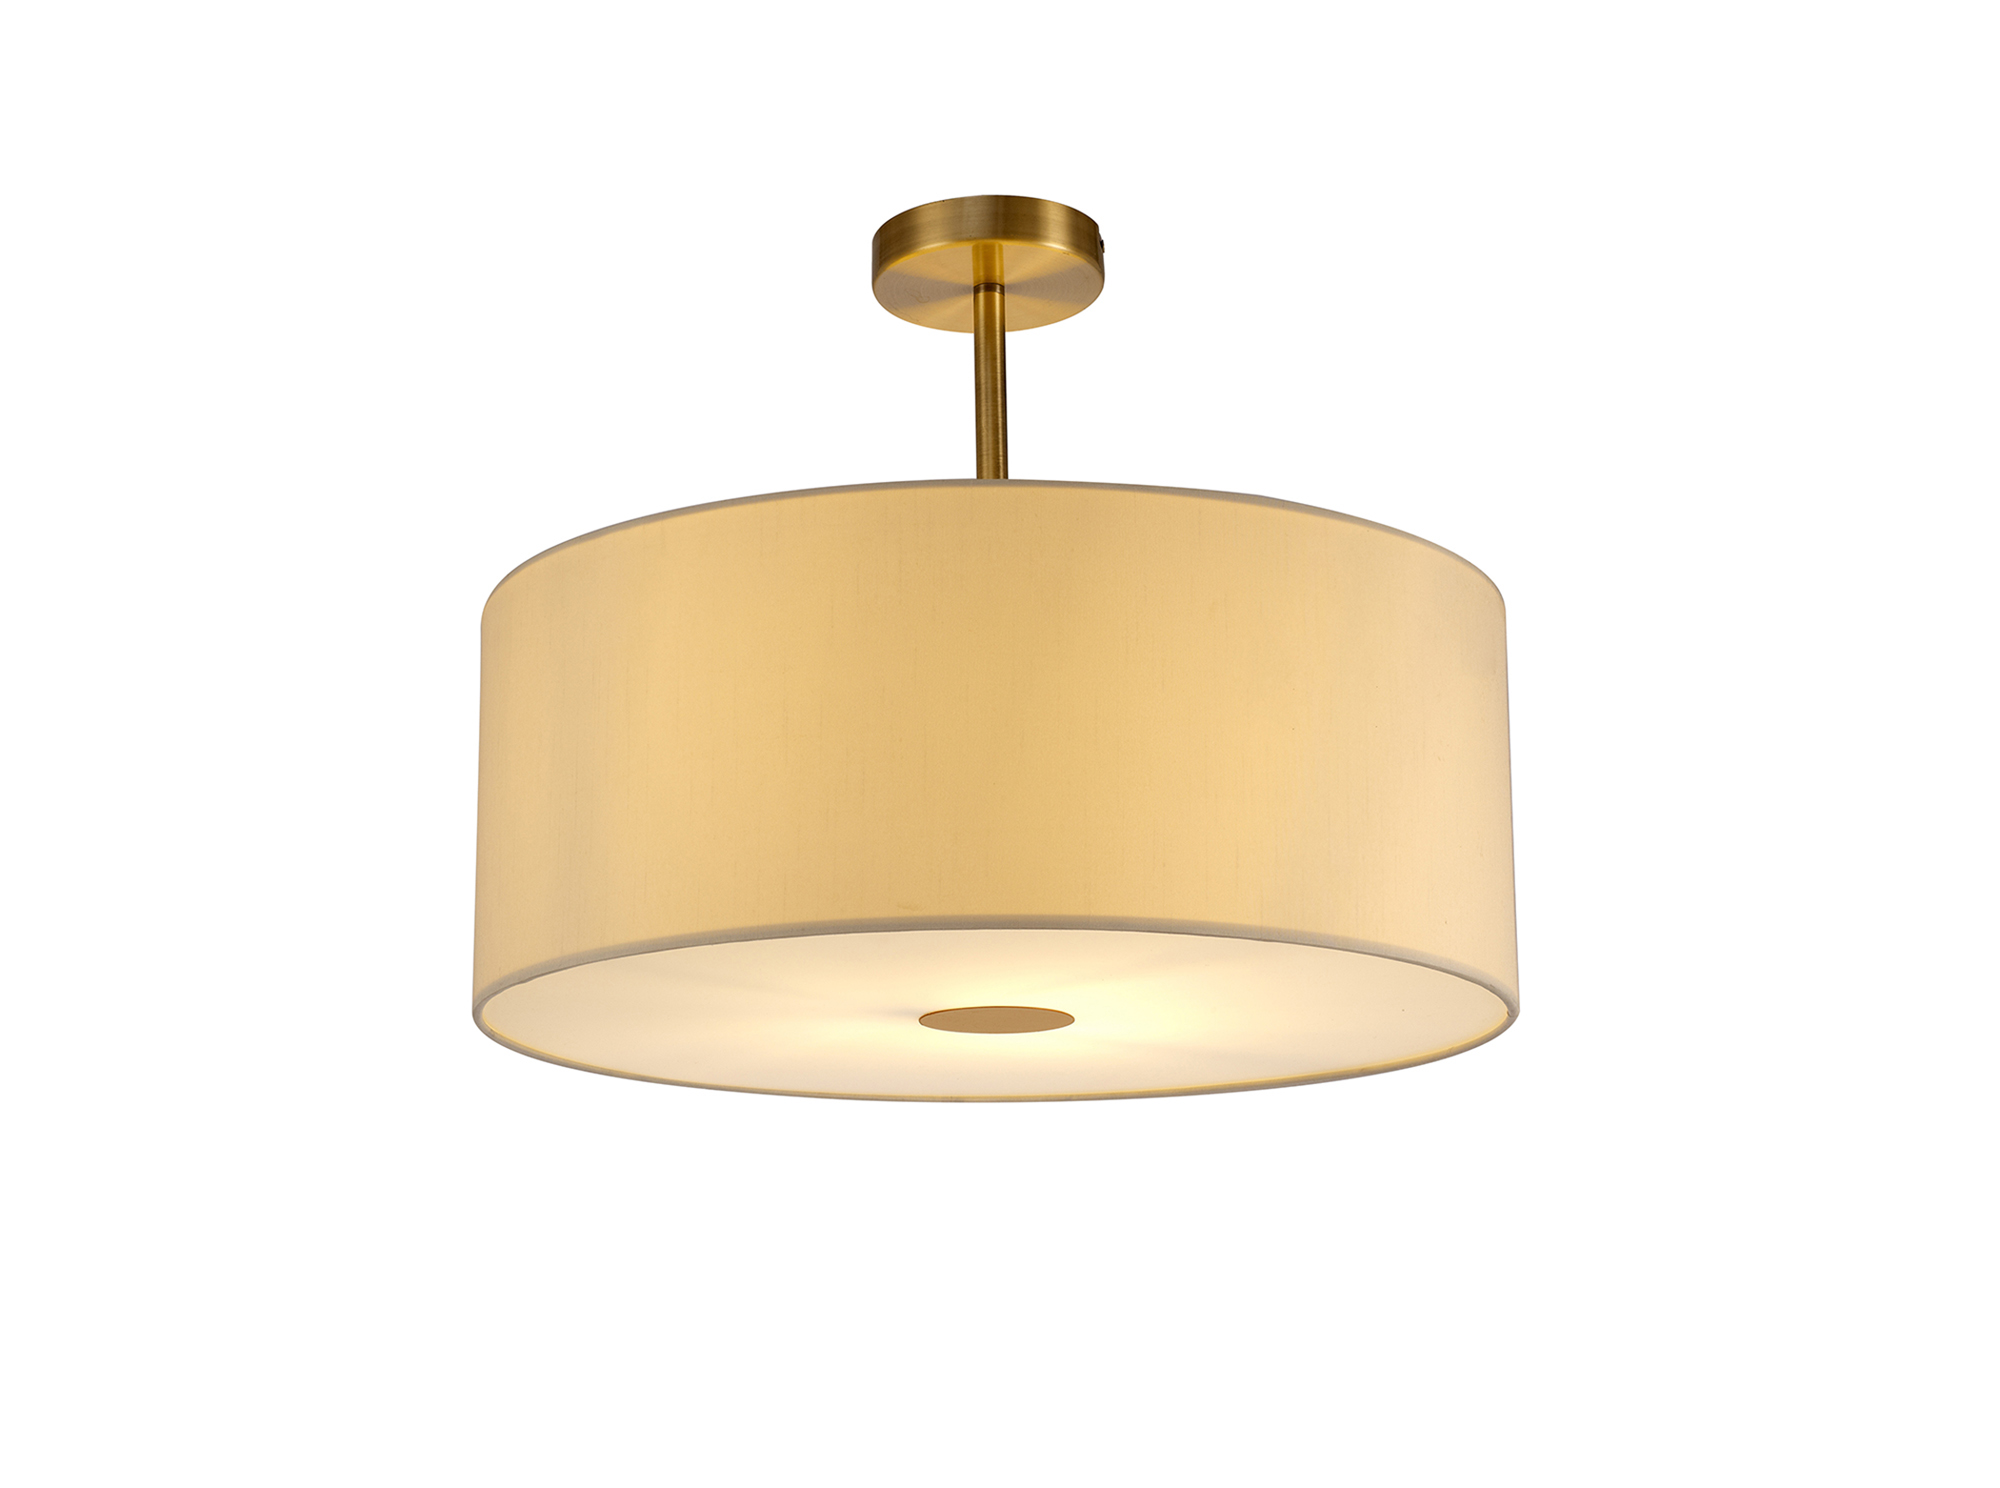 DK0183  Baymont 50cm Semi Flush 1 Light Antique Brass, Ivory Pearl, Frosted Diffuser